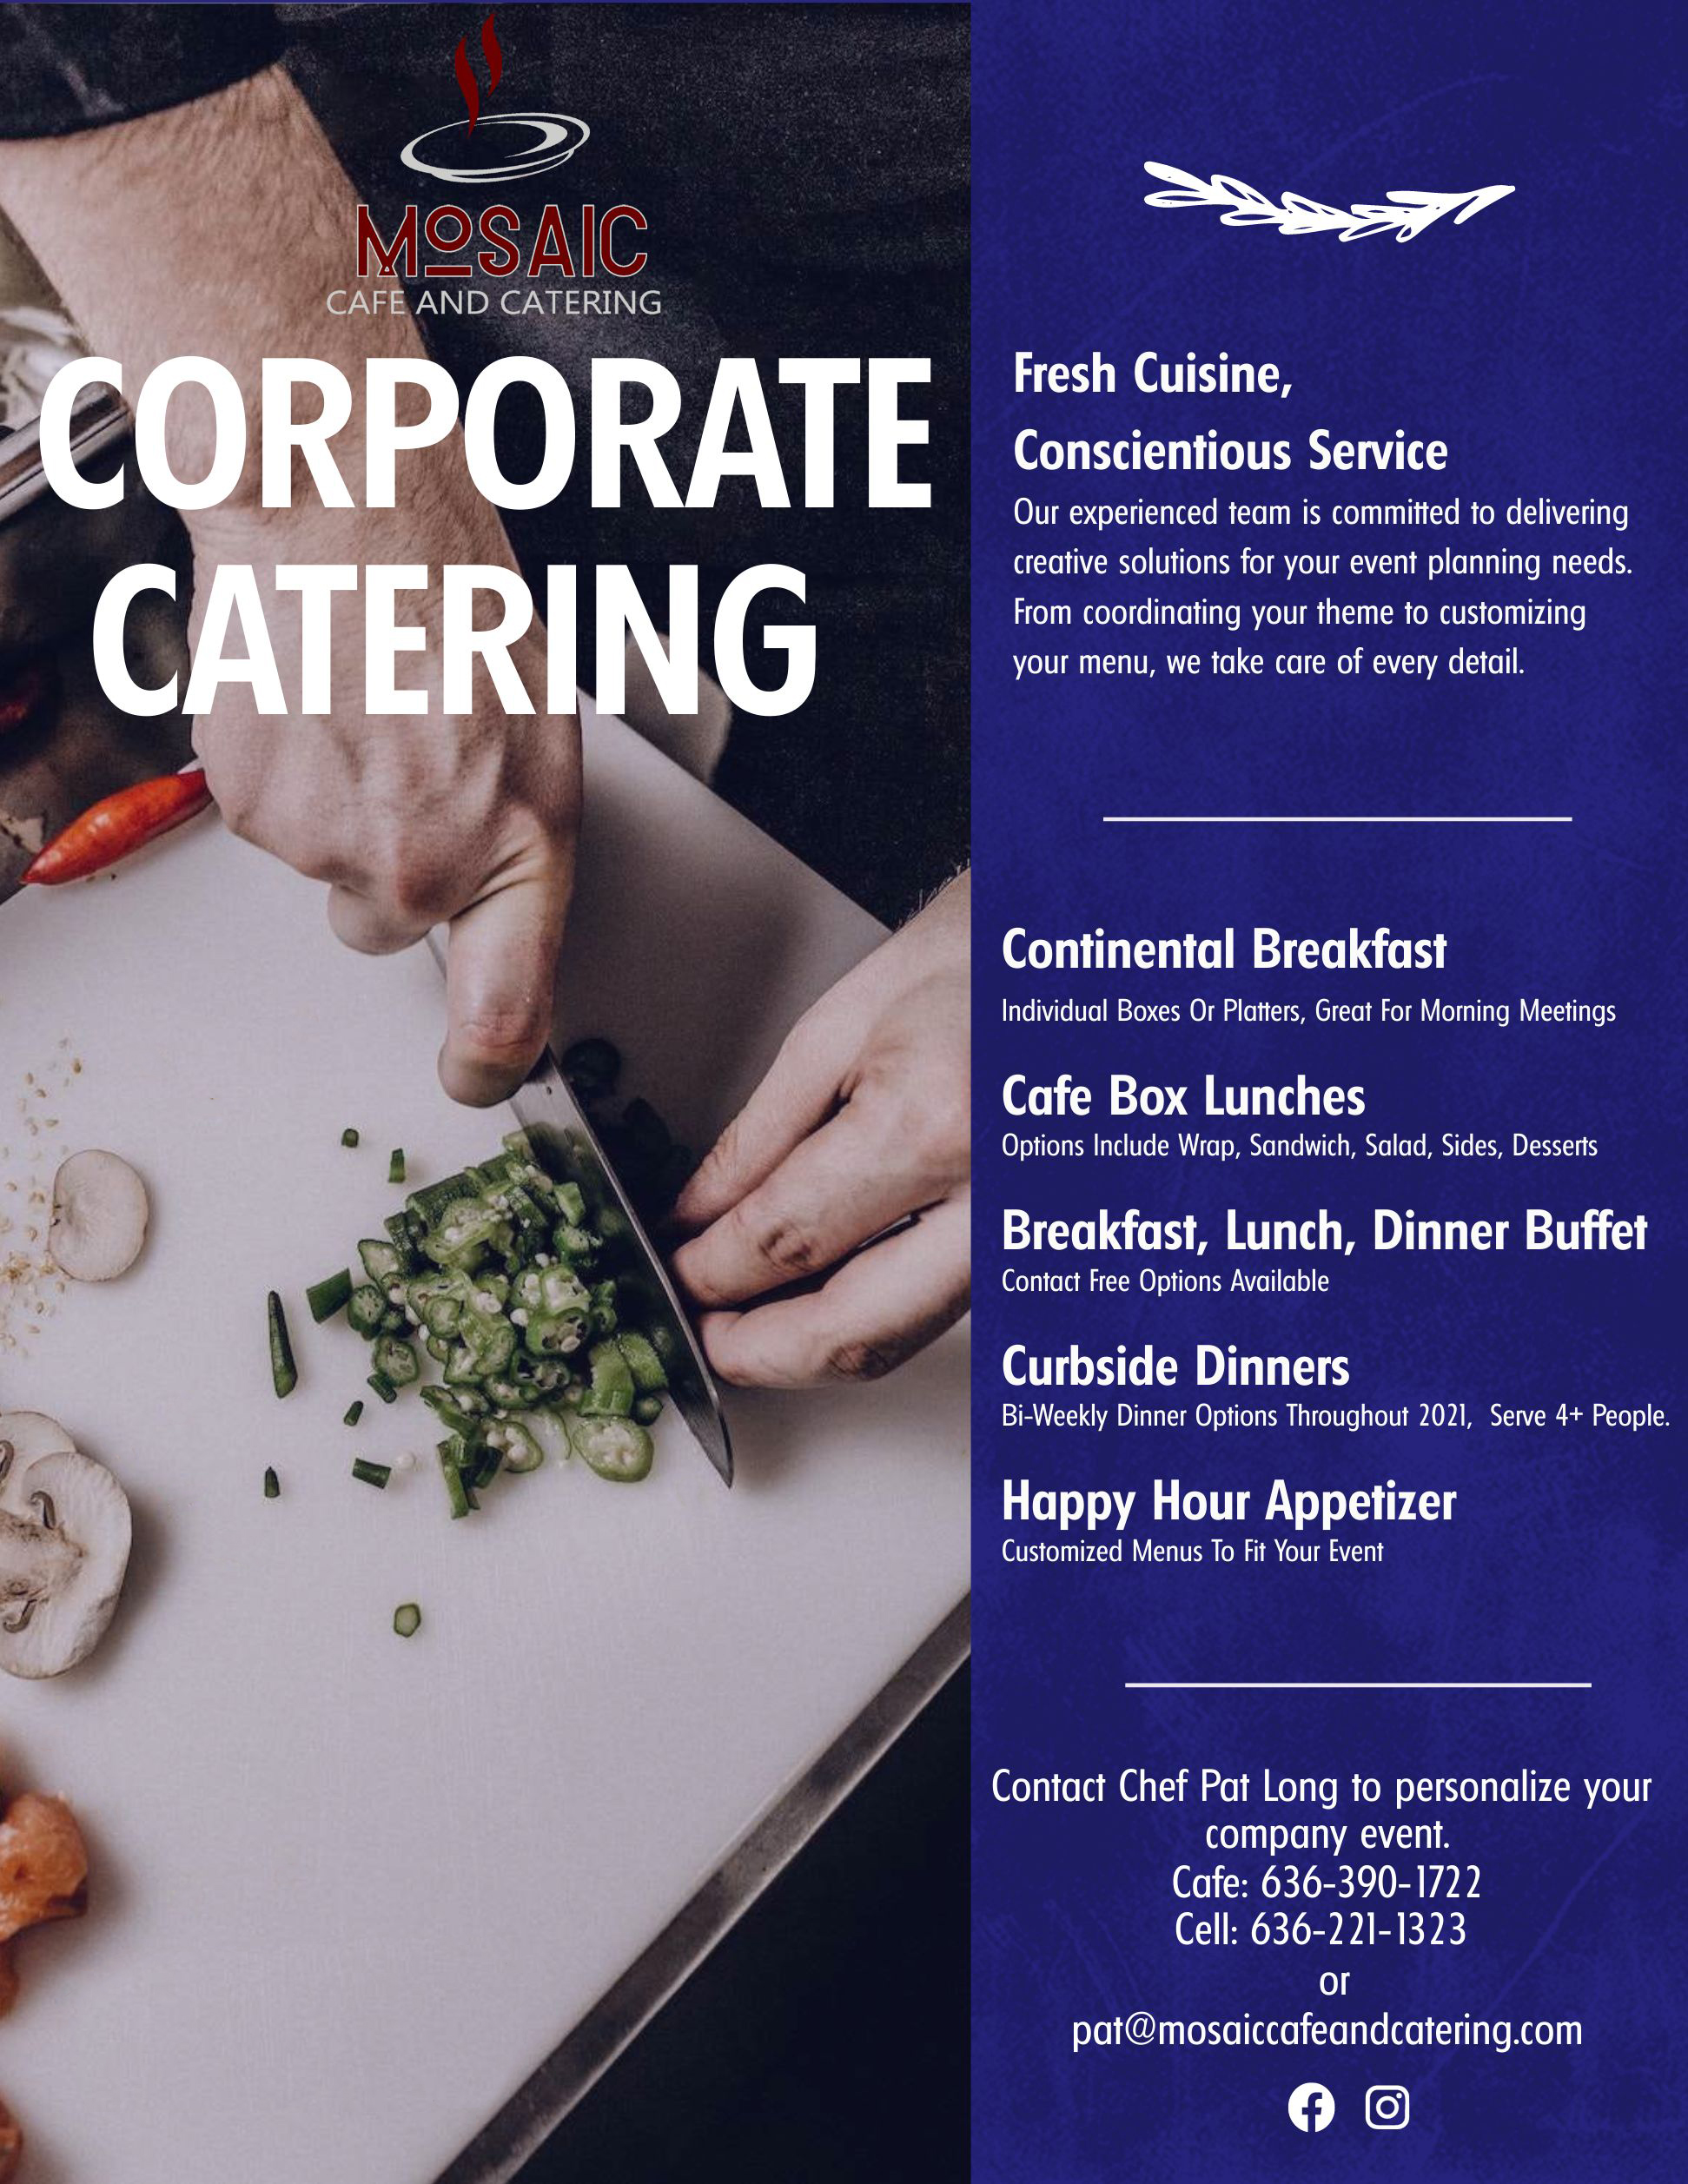 https://mosaiccafeandcatering.com/wp-content/uploads/2021/02/Corporate-Catering-Flyer-2021.jpg